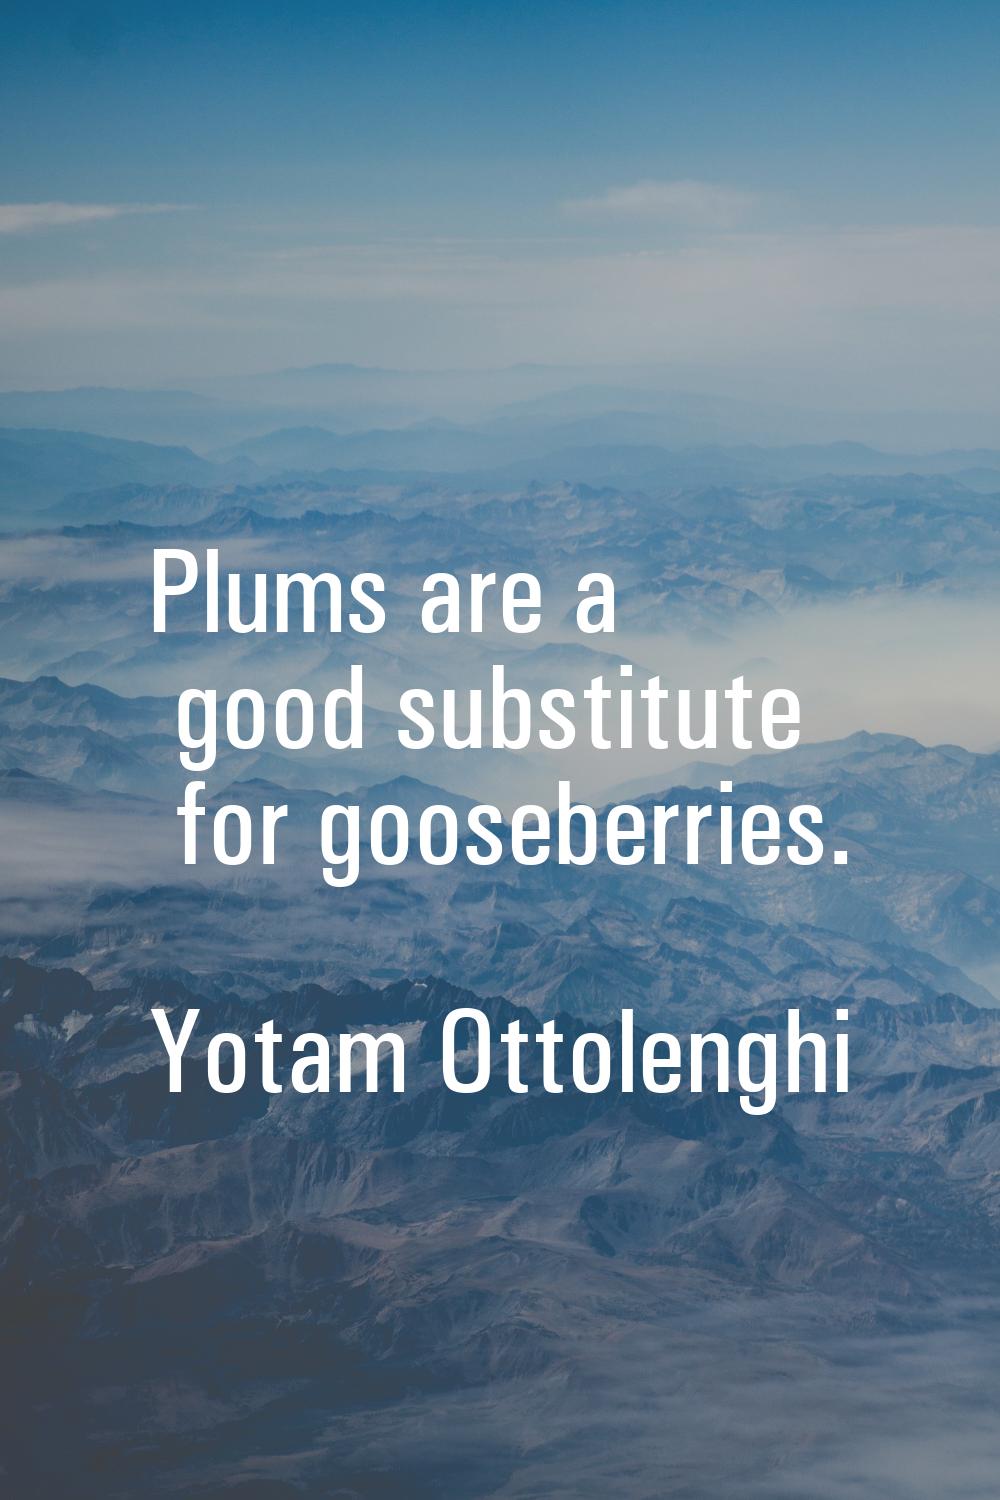 Plums are a good substitute for gooseberries.